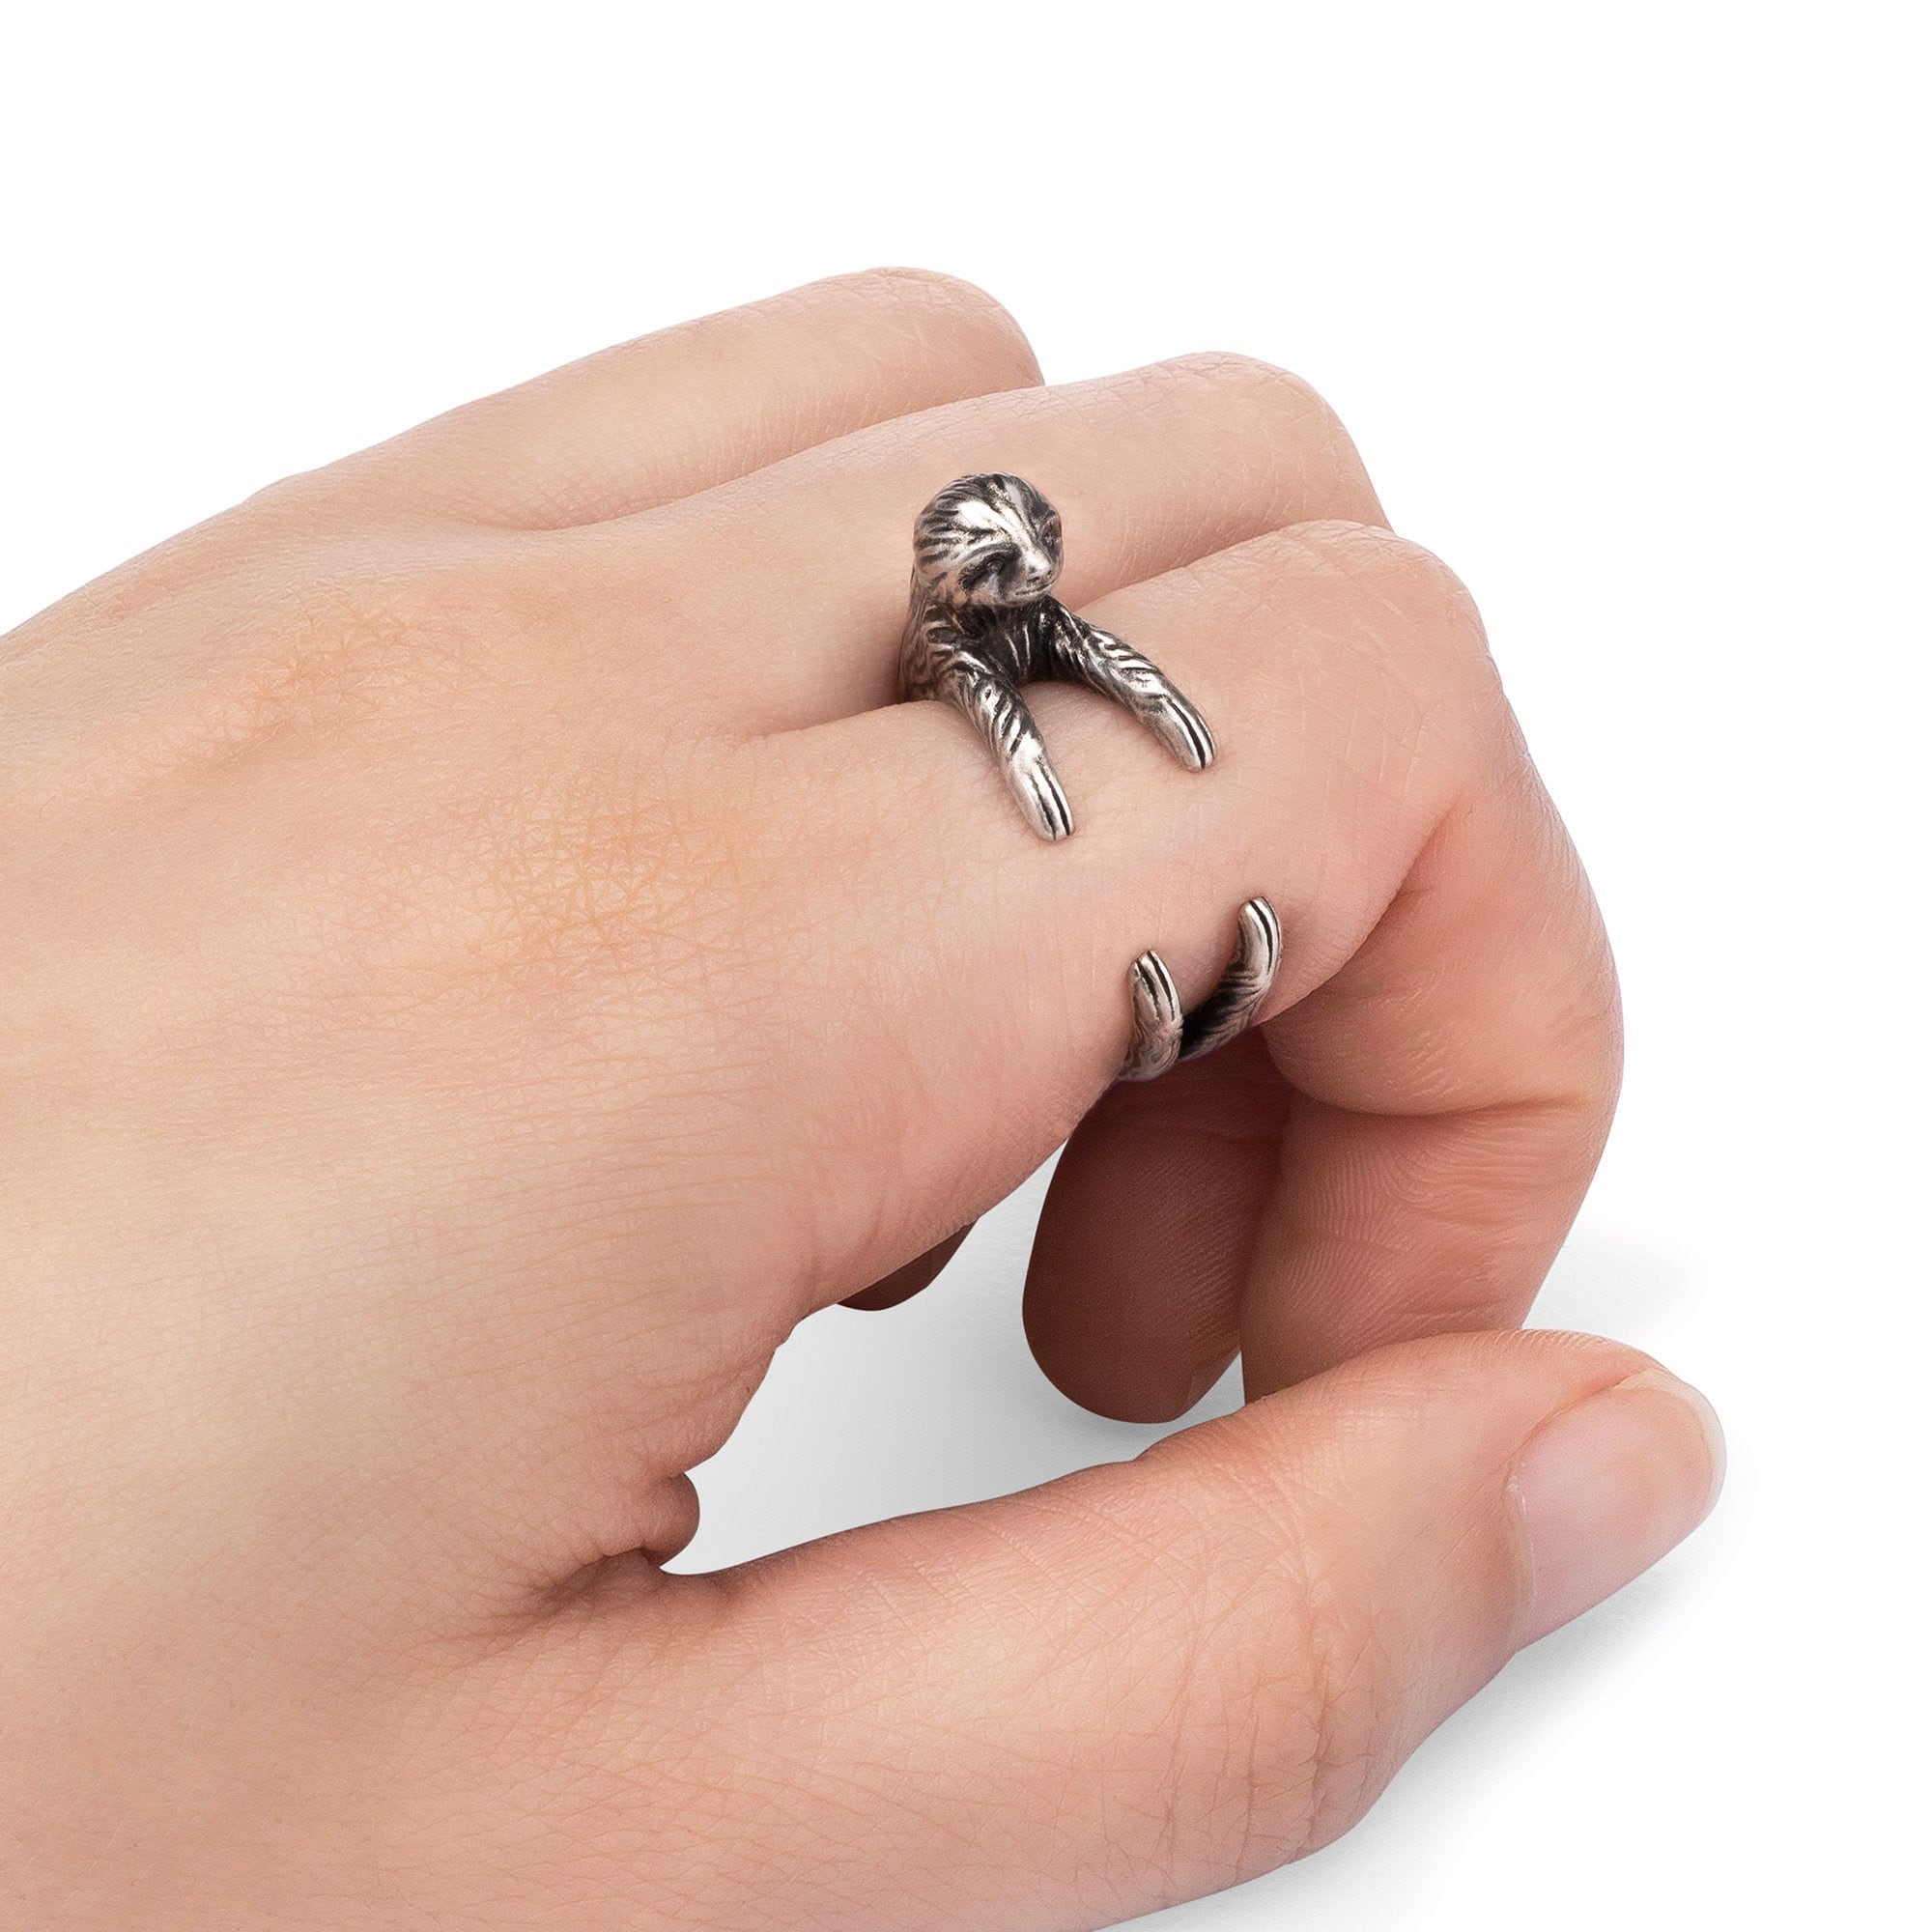 Adjustable Cute Sloth Ring Jewelry